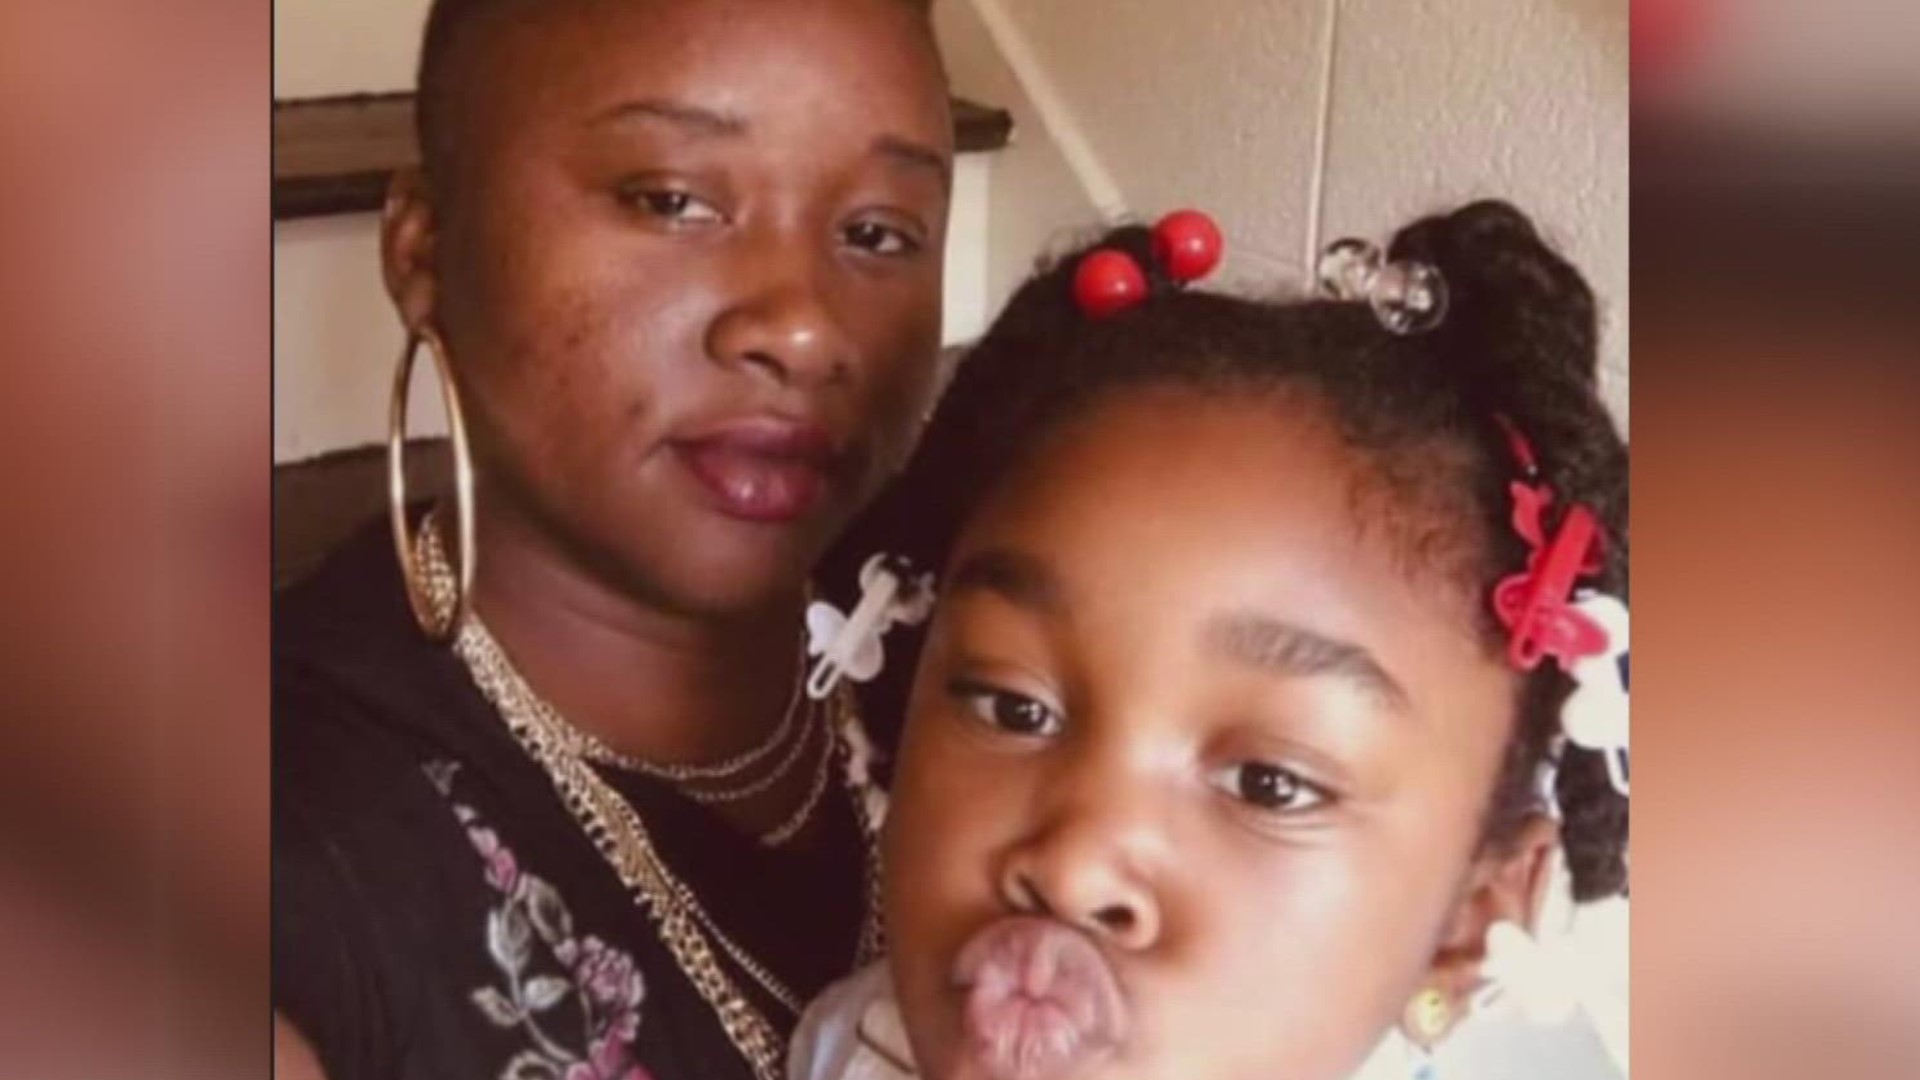 The mother and daughter were killed and it was days before the daughter's body was found in a local landfill.